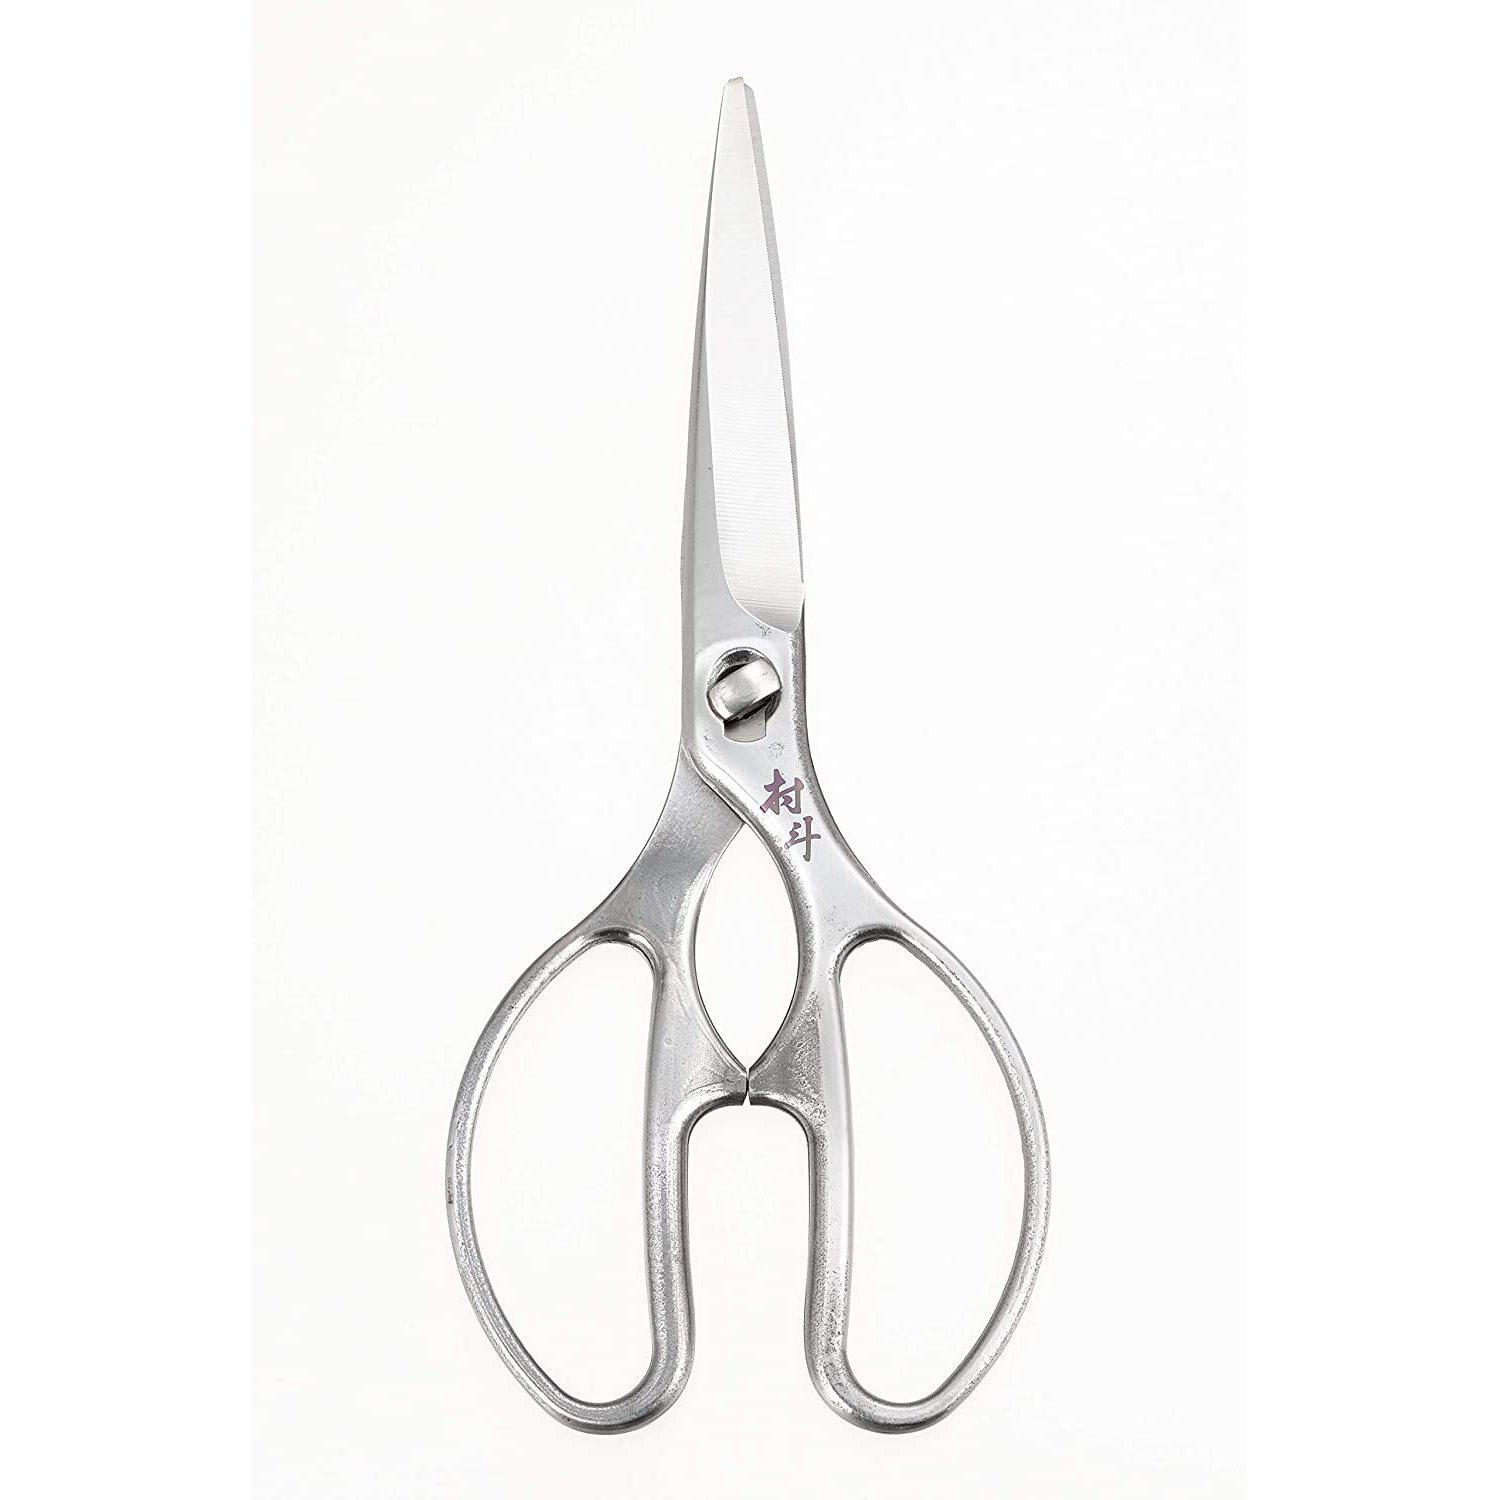 KIYOTSUNA Chef Kitchen Scissors Stainless Forged Food Scissors Made In  Japan New